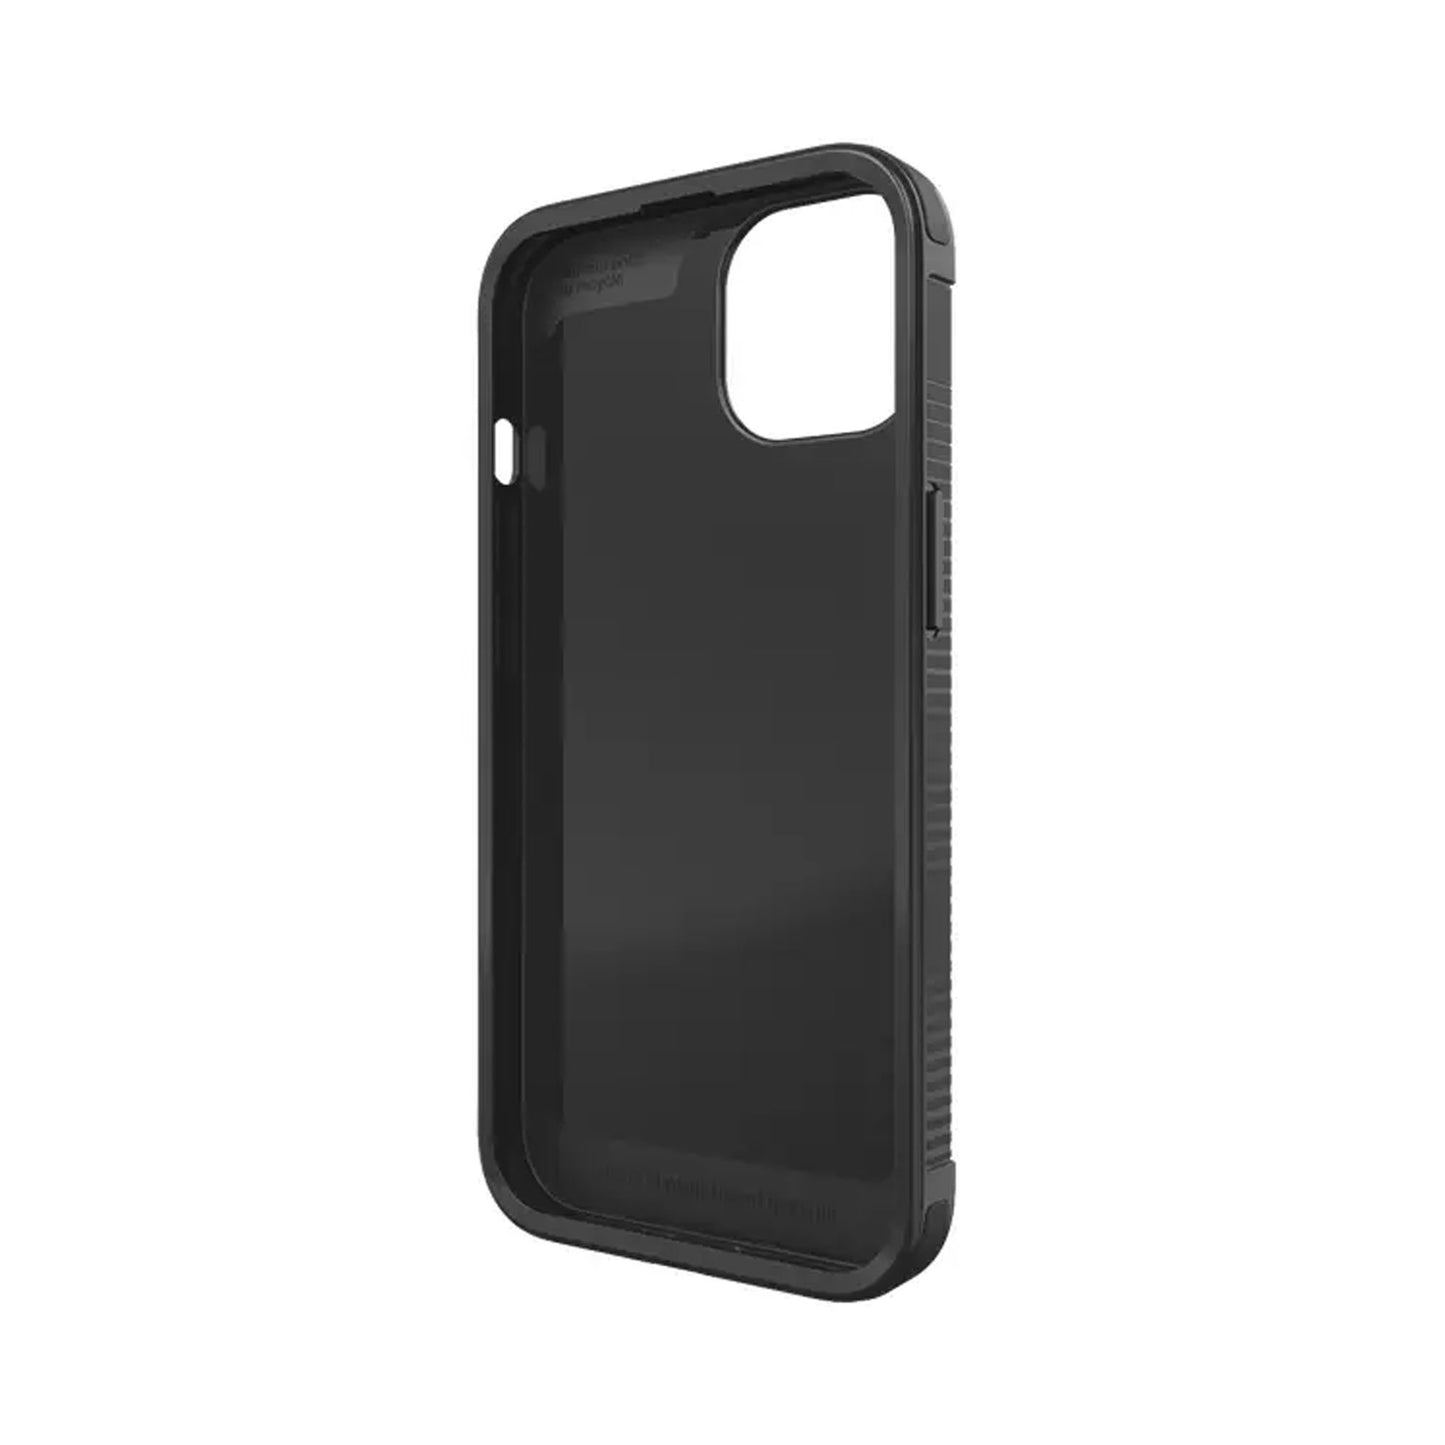 Gear4 Havana for iPhone 13 Pro Max 6.7" 5G - Black (Barcode: 840056146426 )